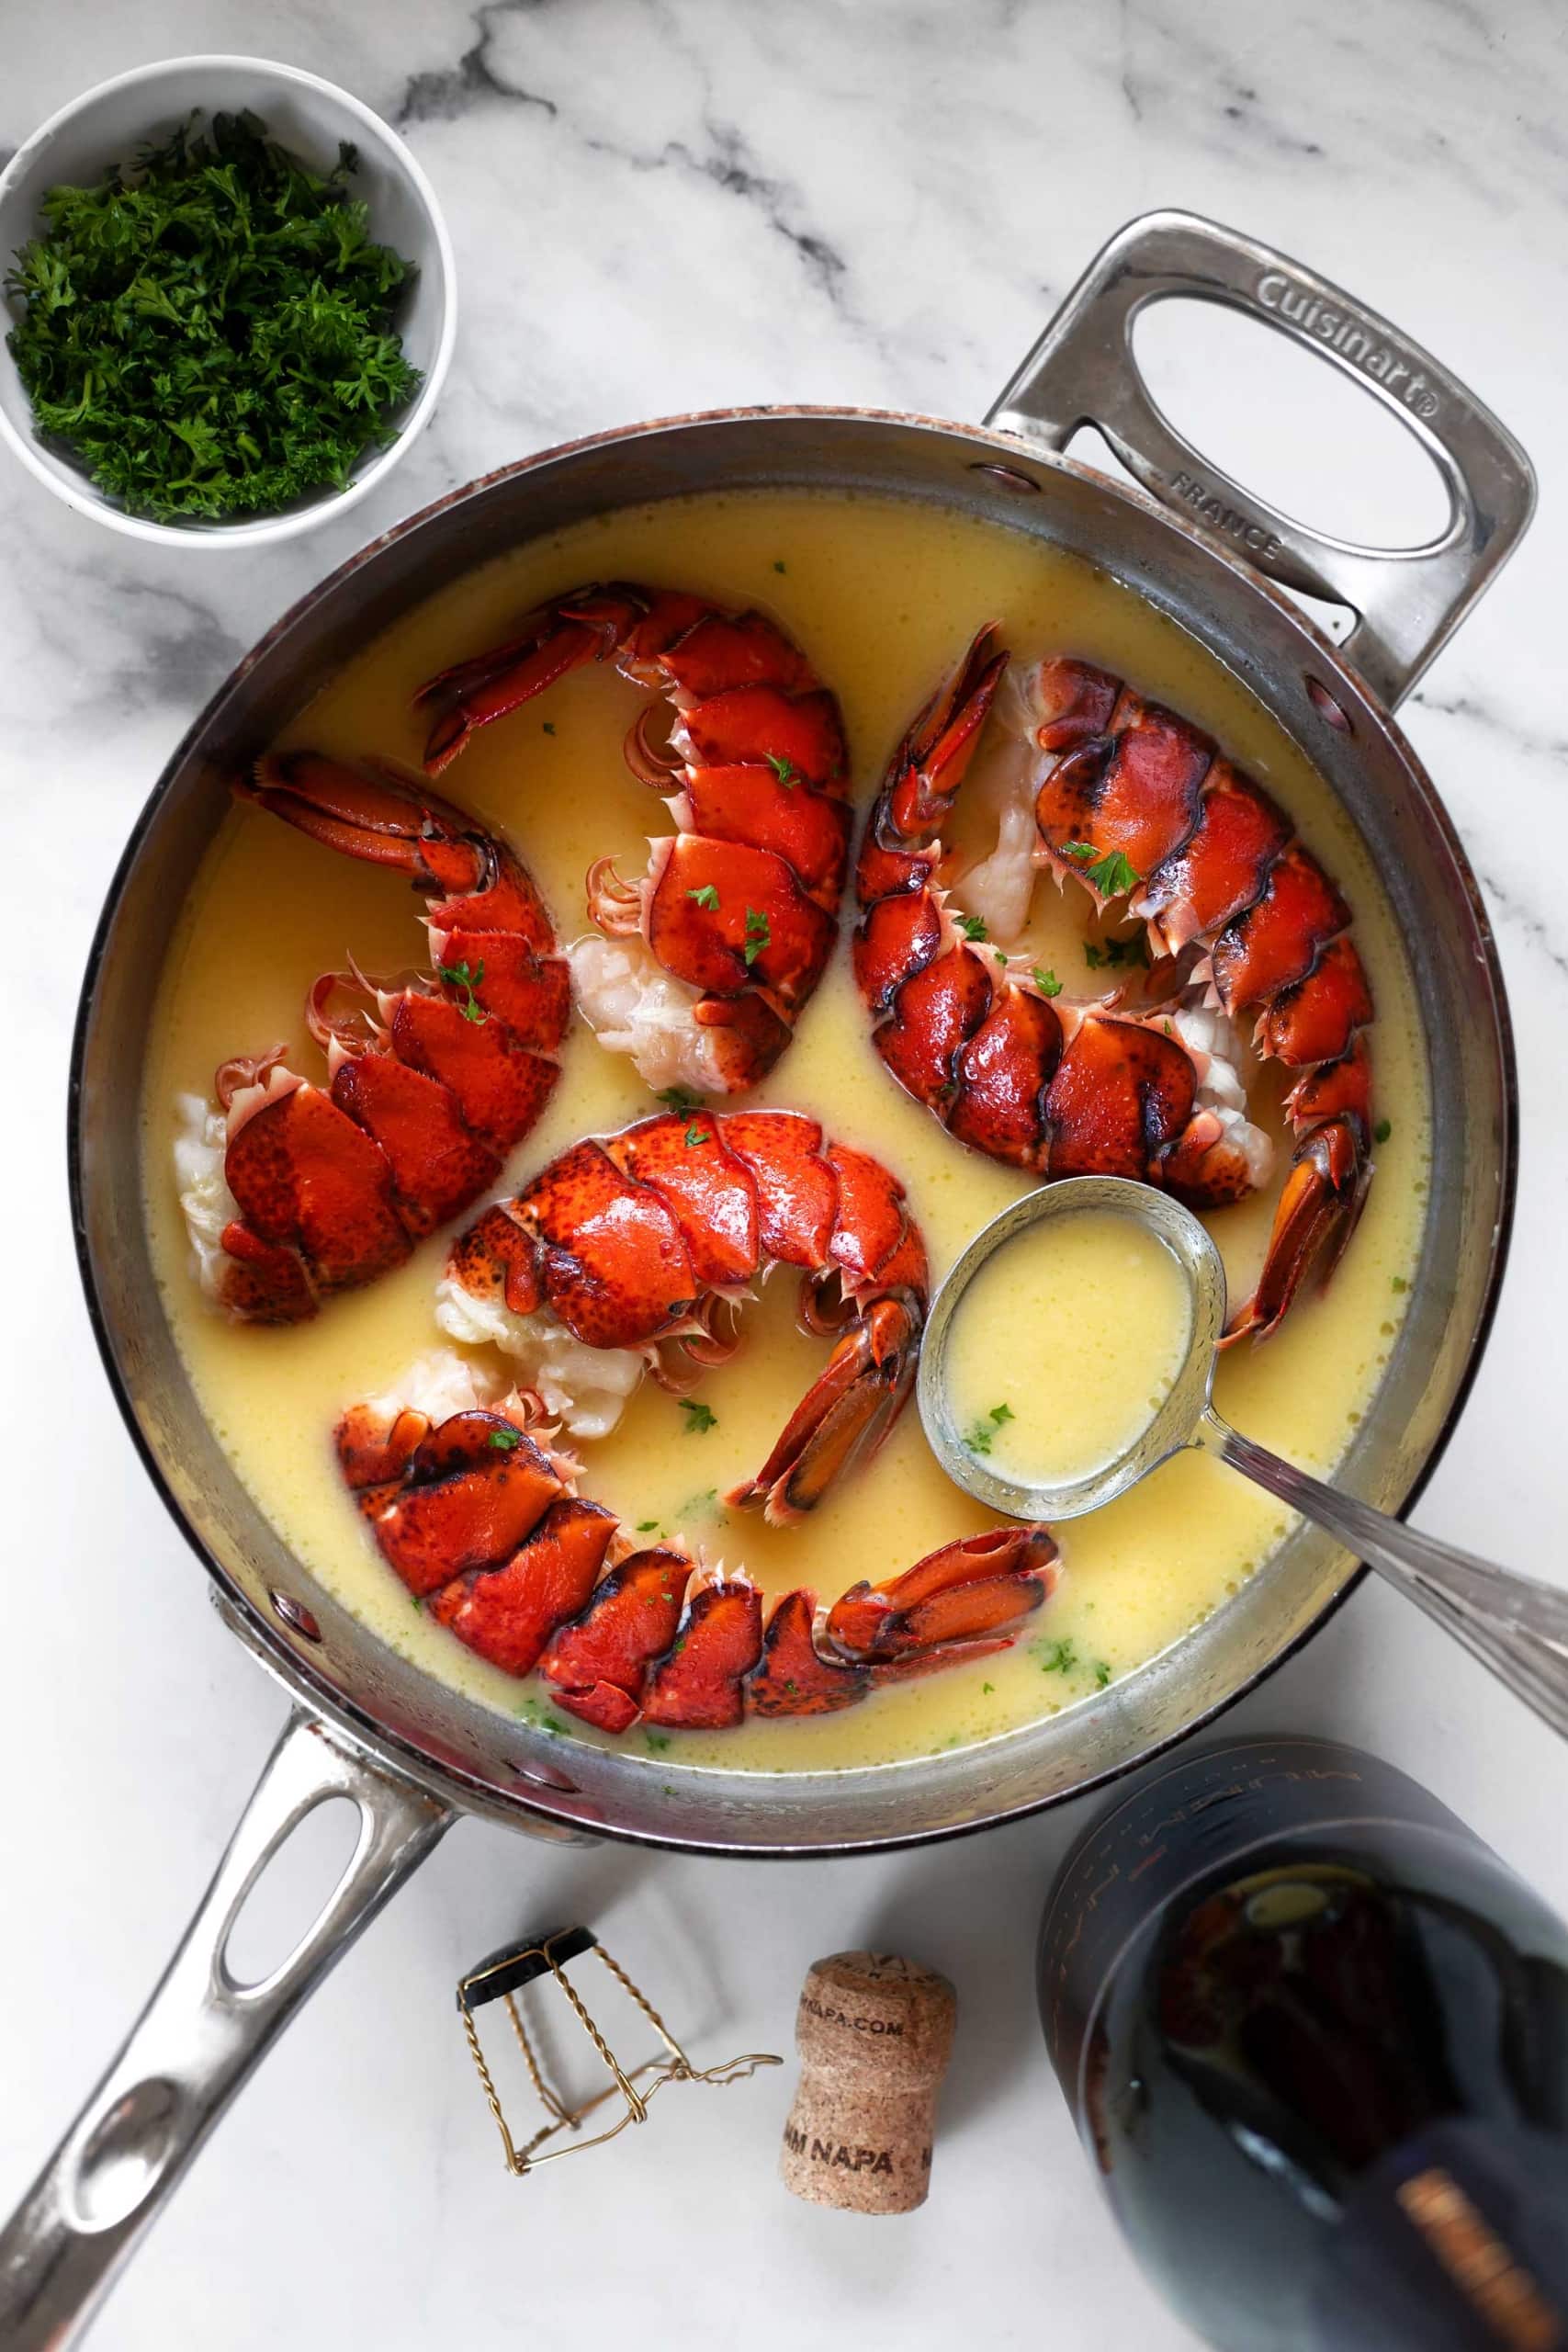 Perfect] How to Cook Lobster, Cooking Lobster